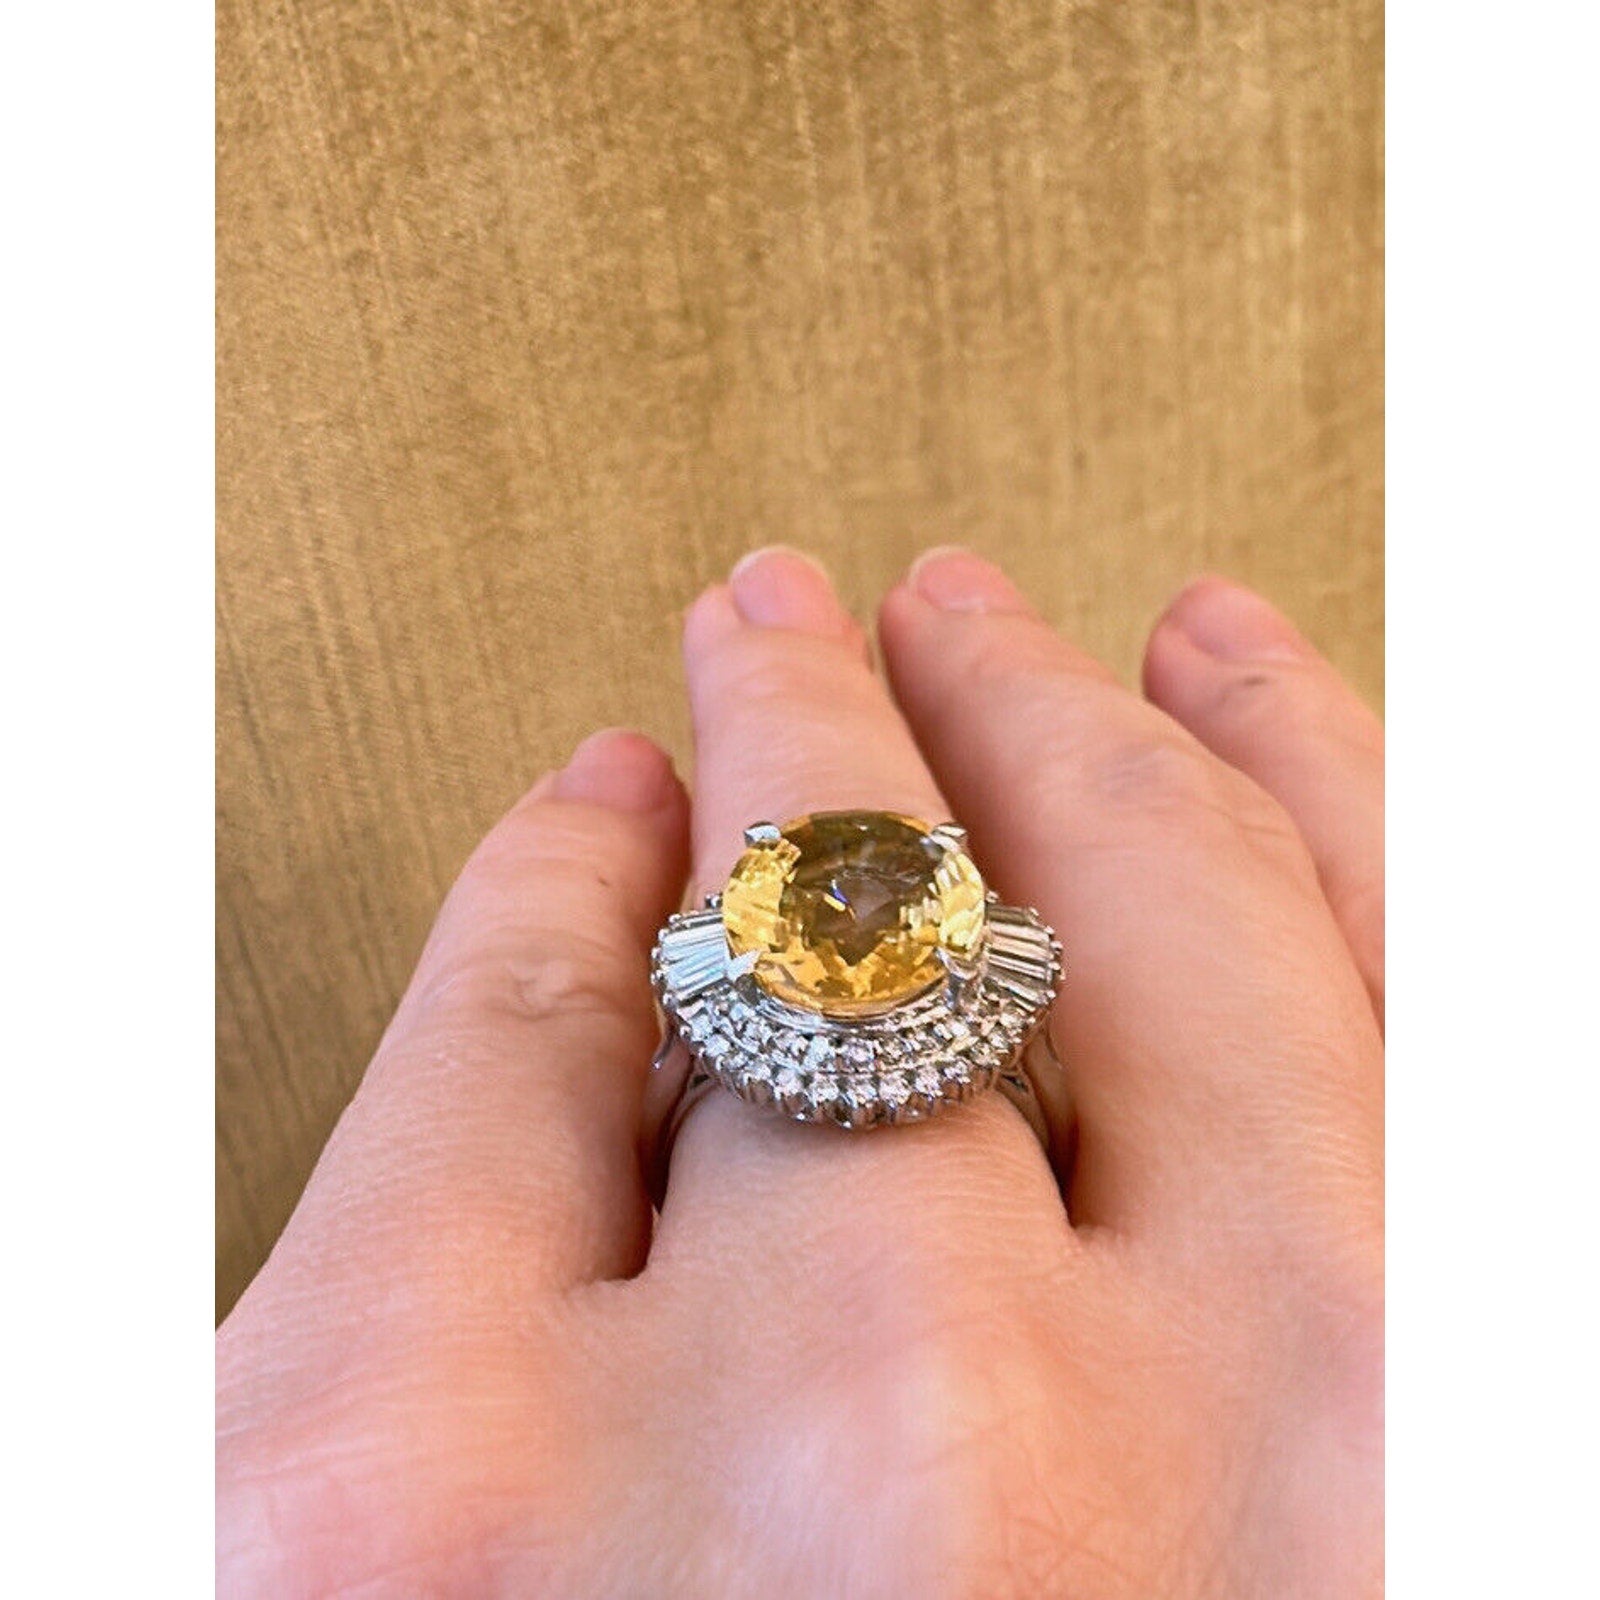 GIA 6.56 ct Unheated Yellow Sapphire and Diamond Ring in Platinum -HM2461AE